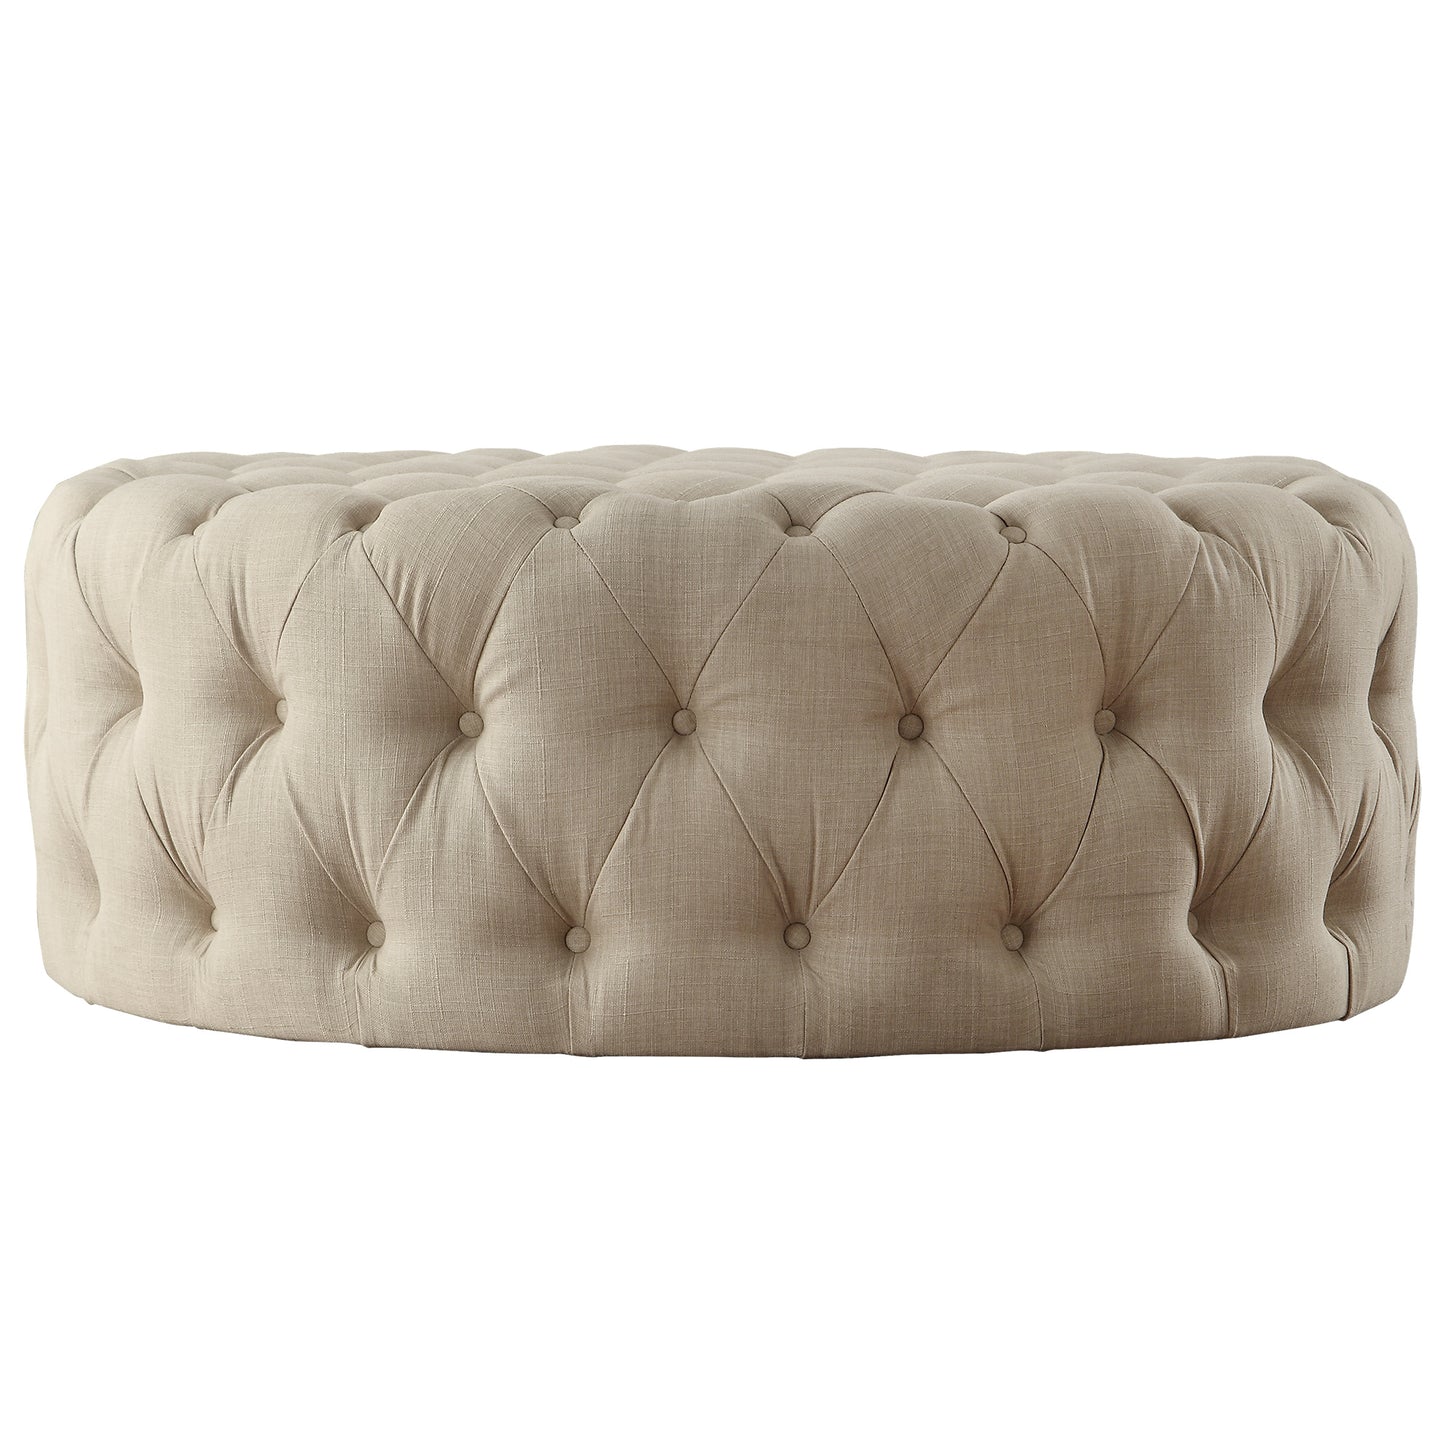 Round Tufted Ottoman with Casters - Beige Linen